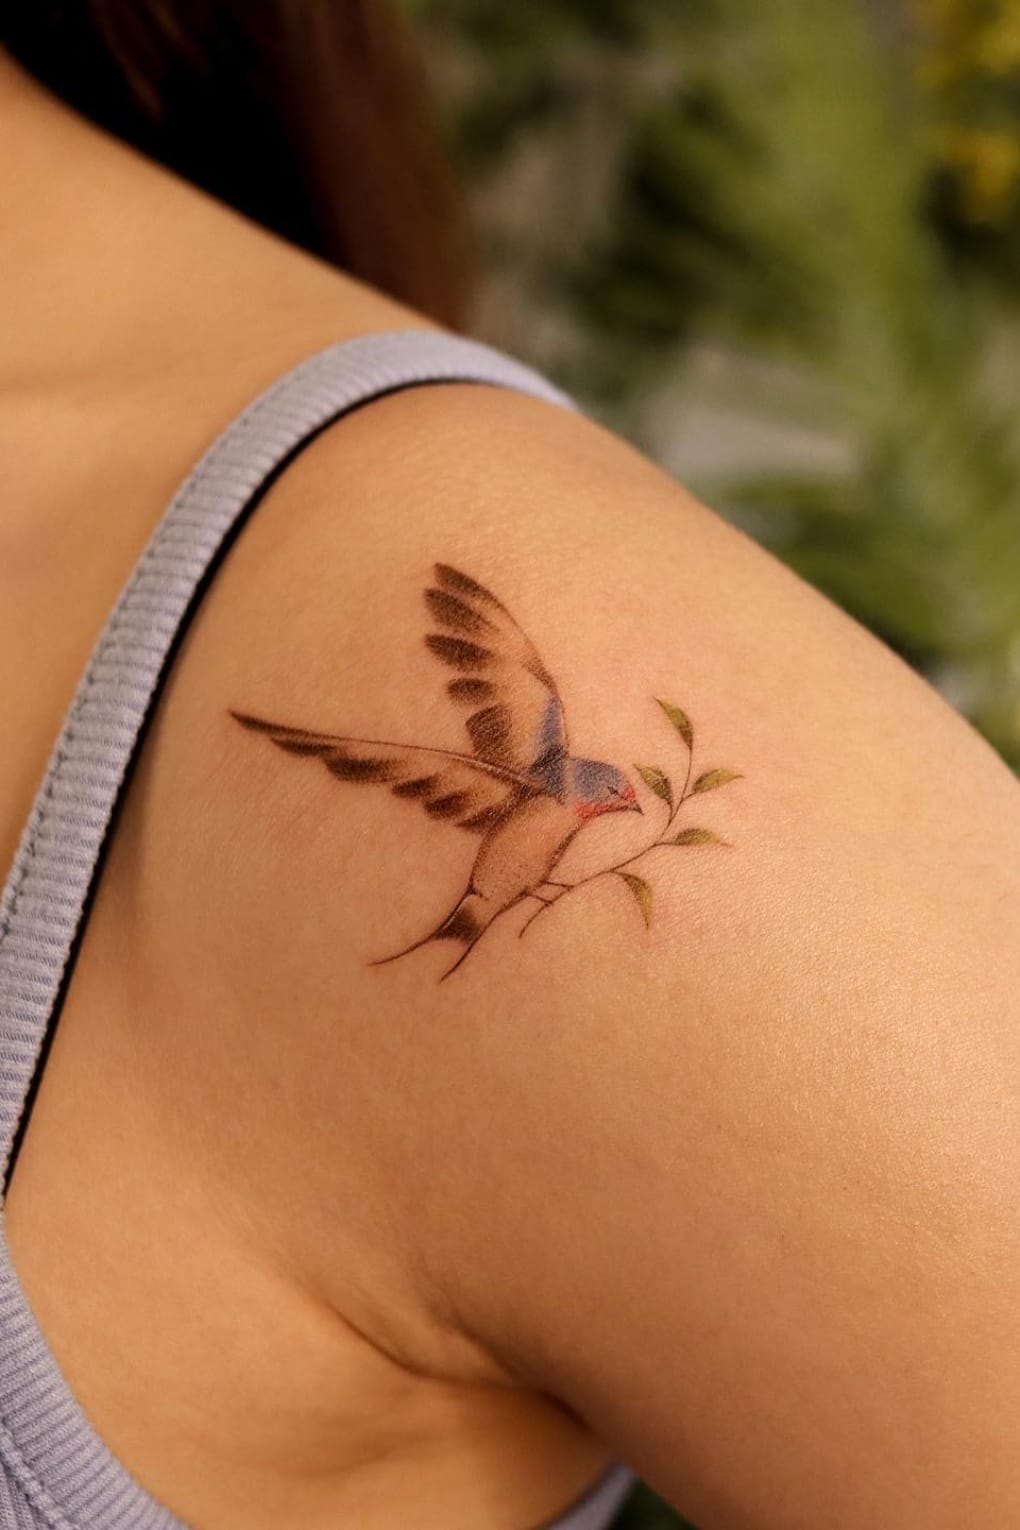 Swallow Tattoo With Plant